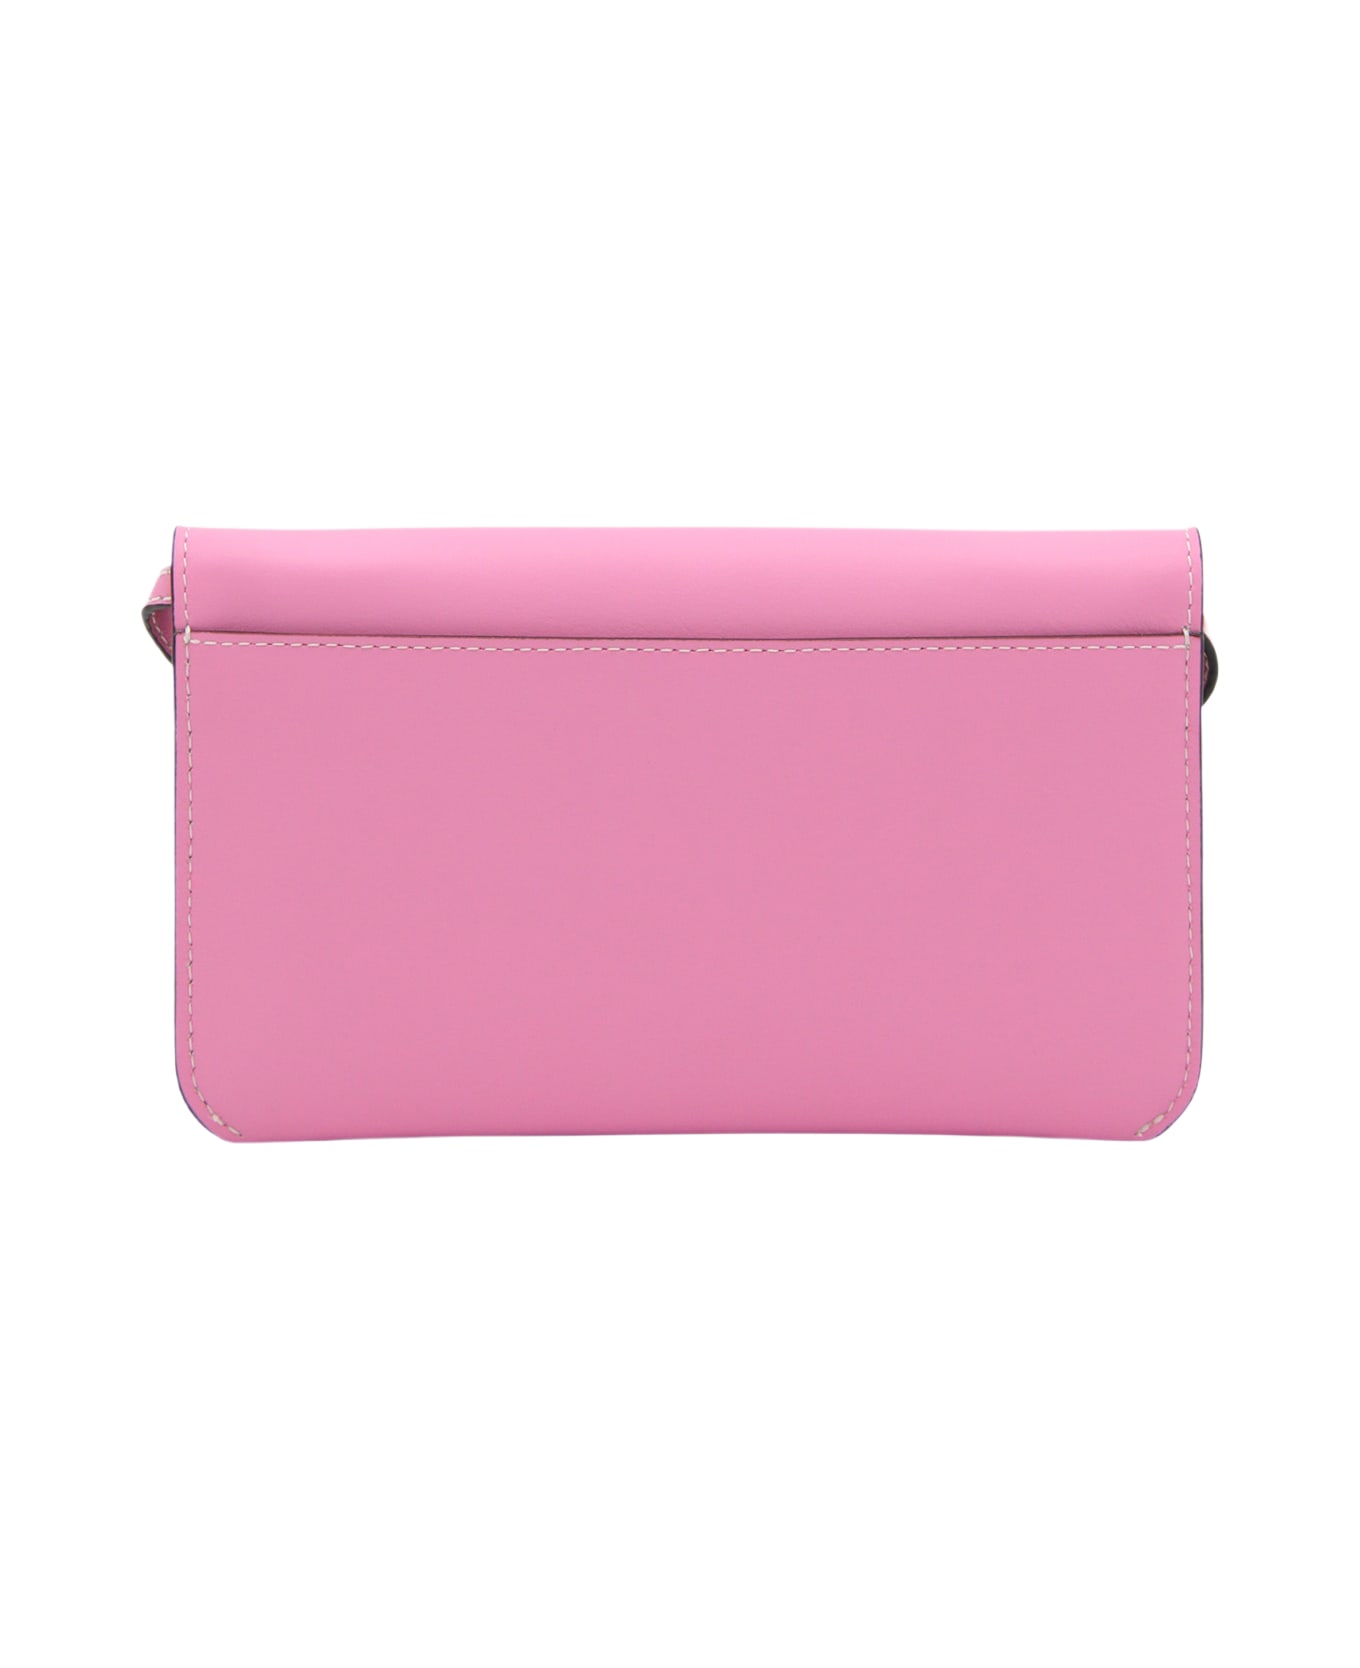 J.W. Anderson Pink Leather Phone Bag - Pink